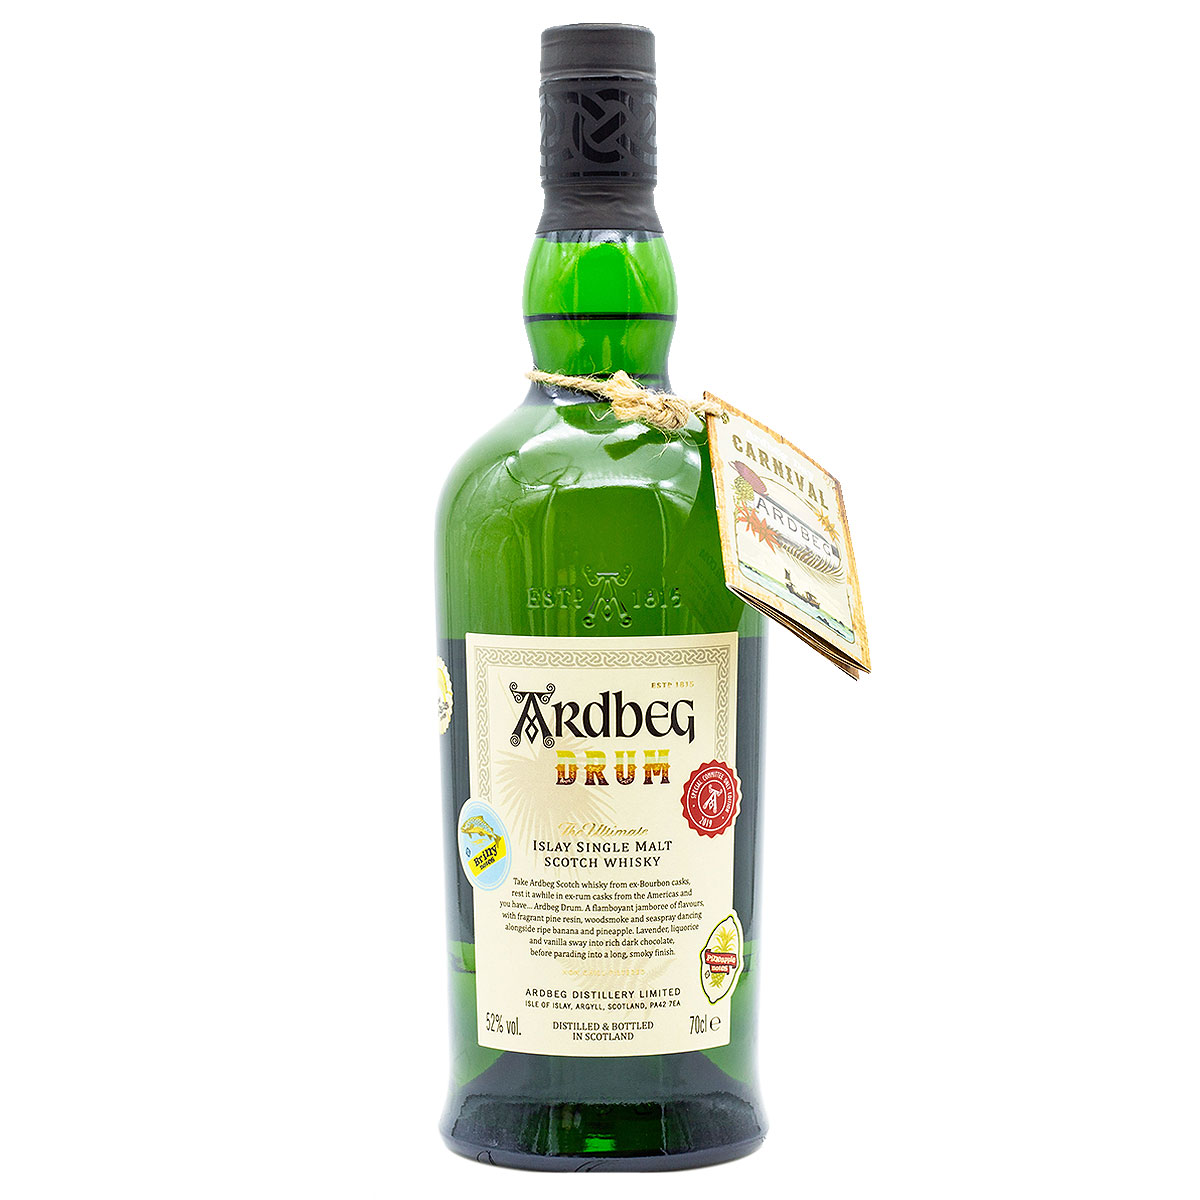 Limited Edition Whisky: Ardbeg Drum Committee Release